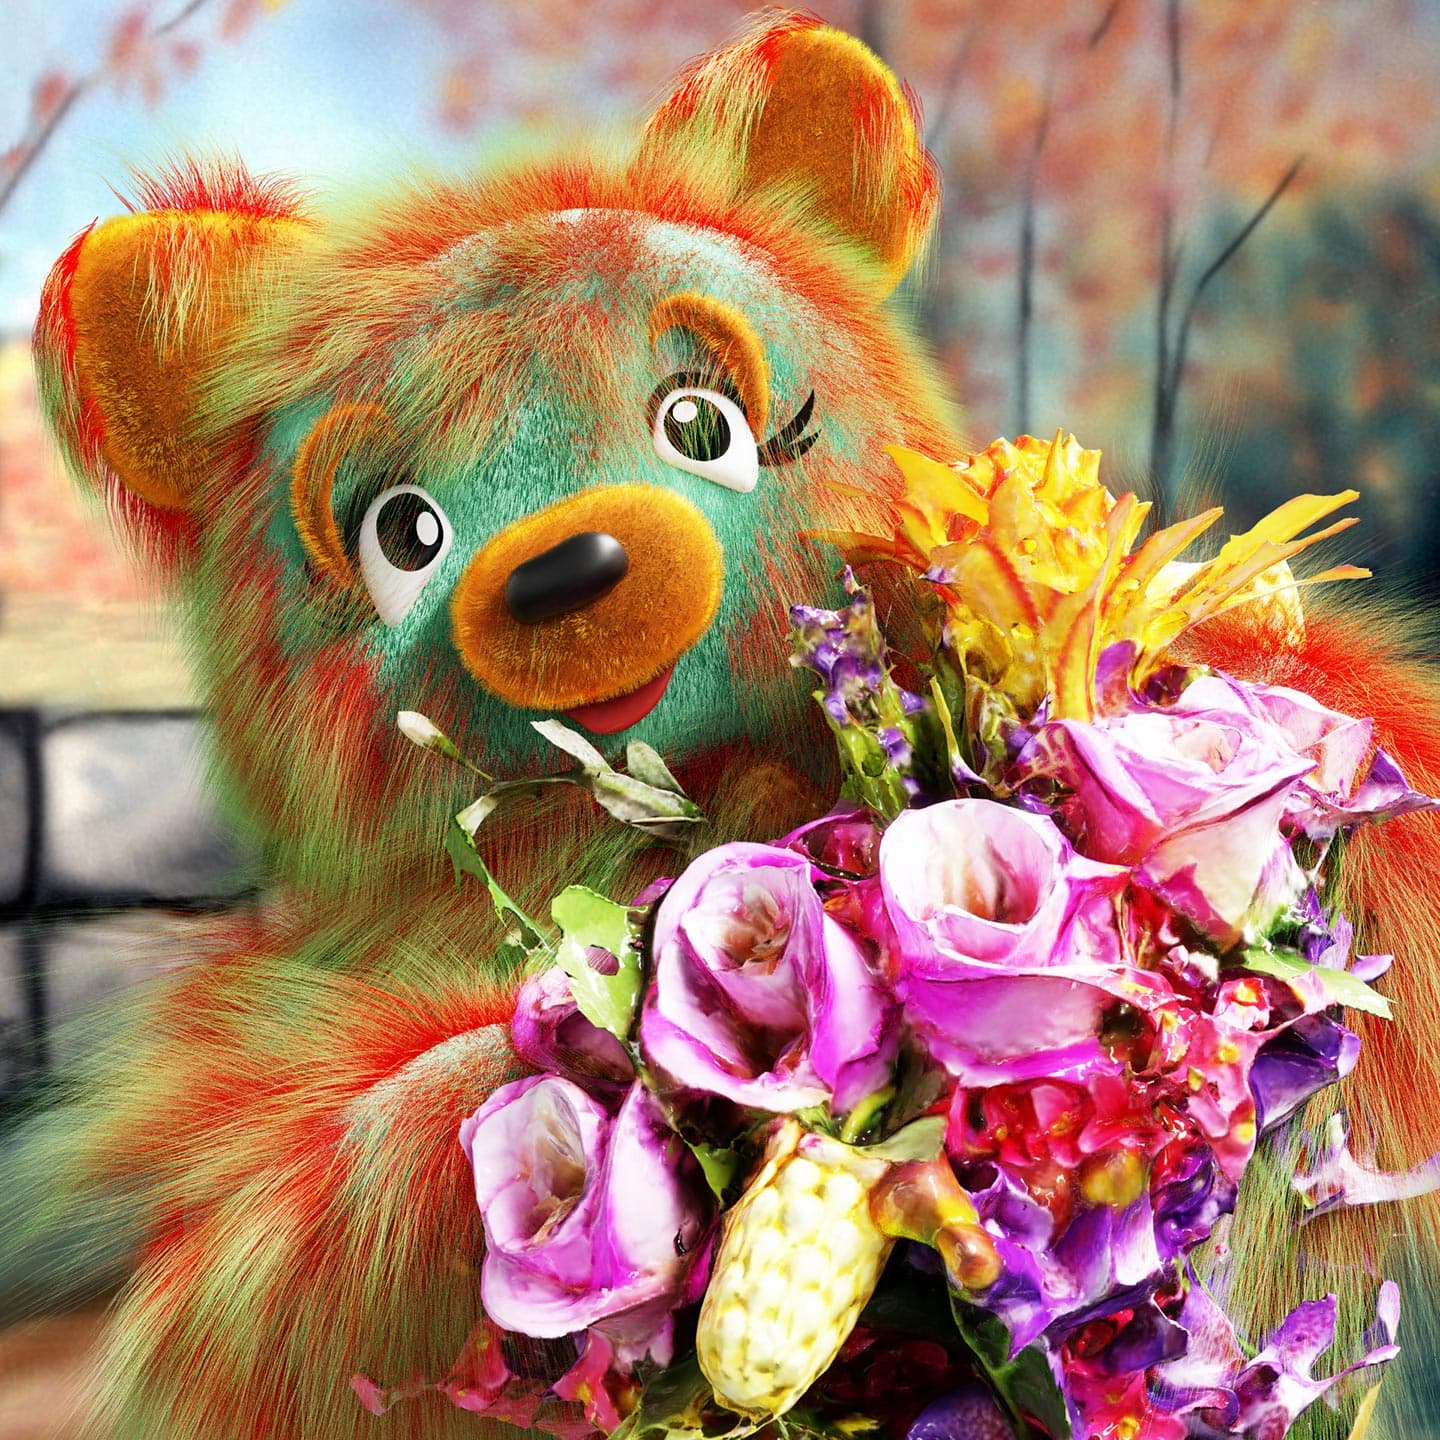 CGI image of a plush teddy bear holding a bouquet of flowers